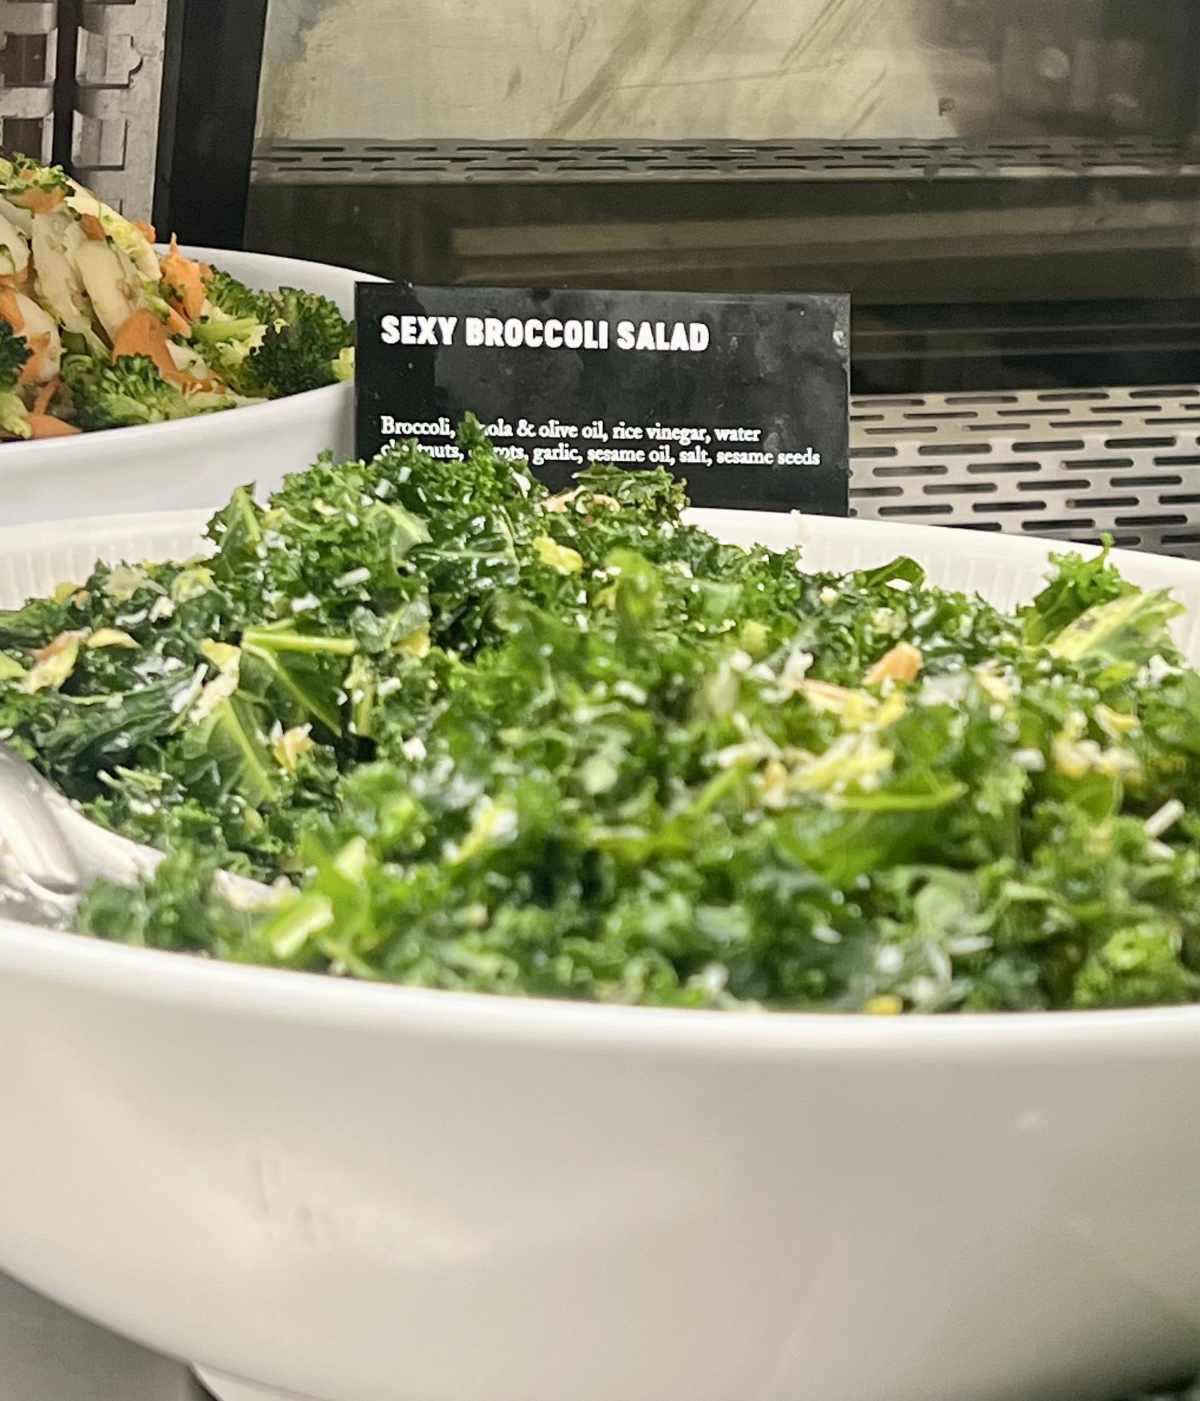 What exactly makes a broccoli salad sexy